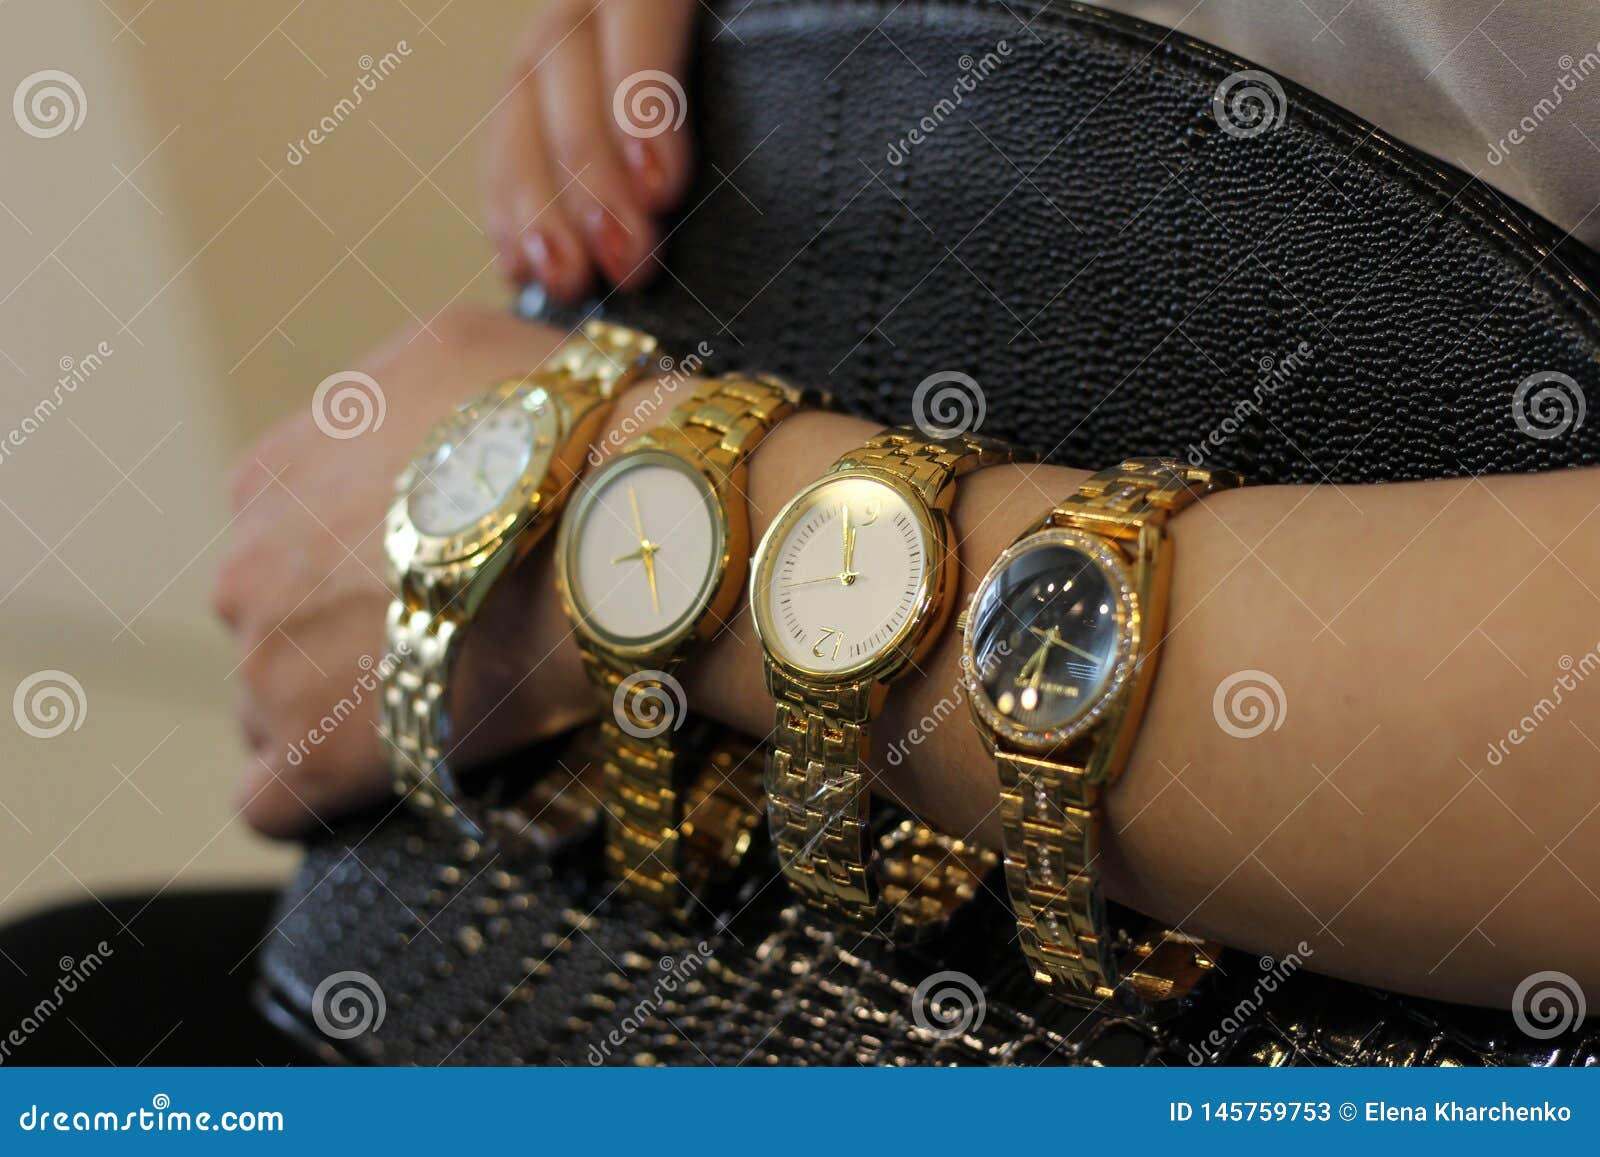 A Lot of Watches the Girl Has on Her Hand a Gold Watch Stock Image - Image  of bracelet, organization: 145759753